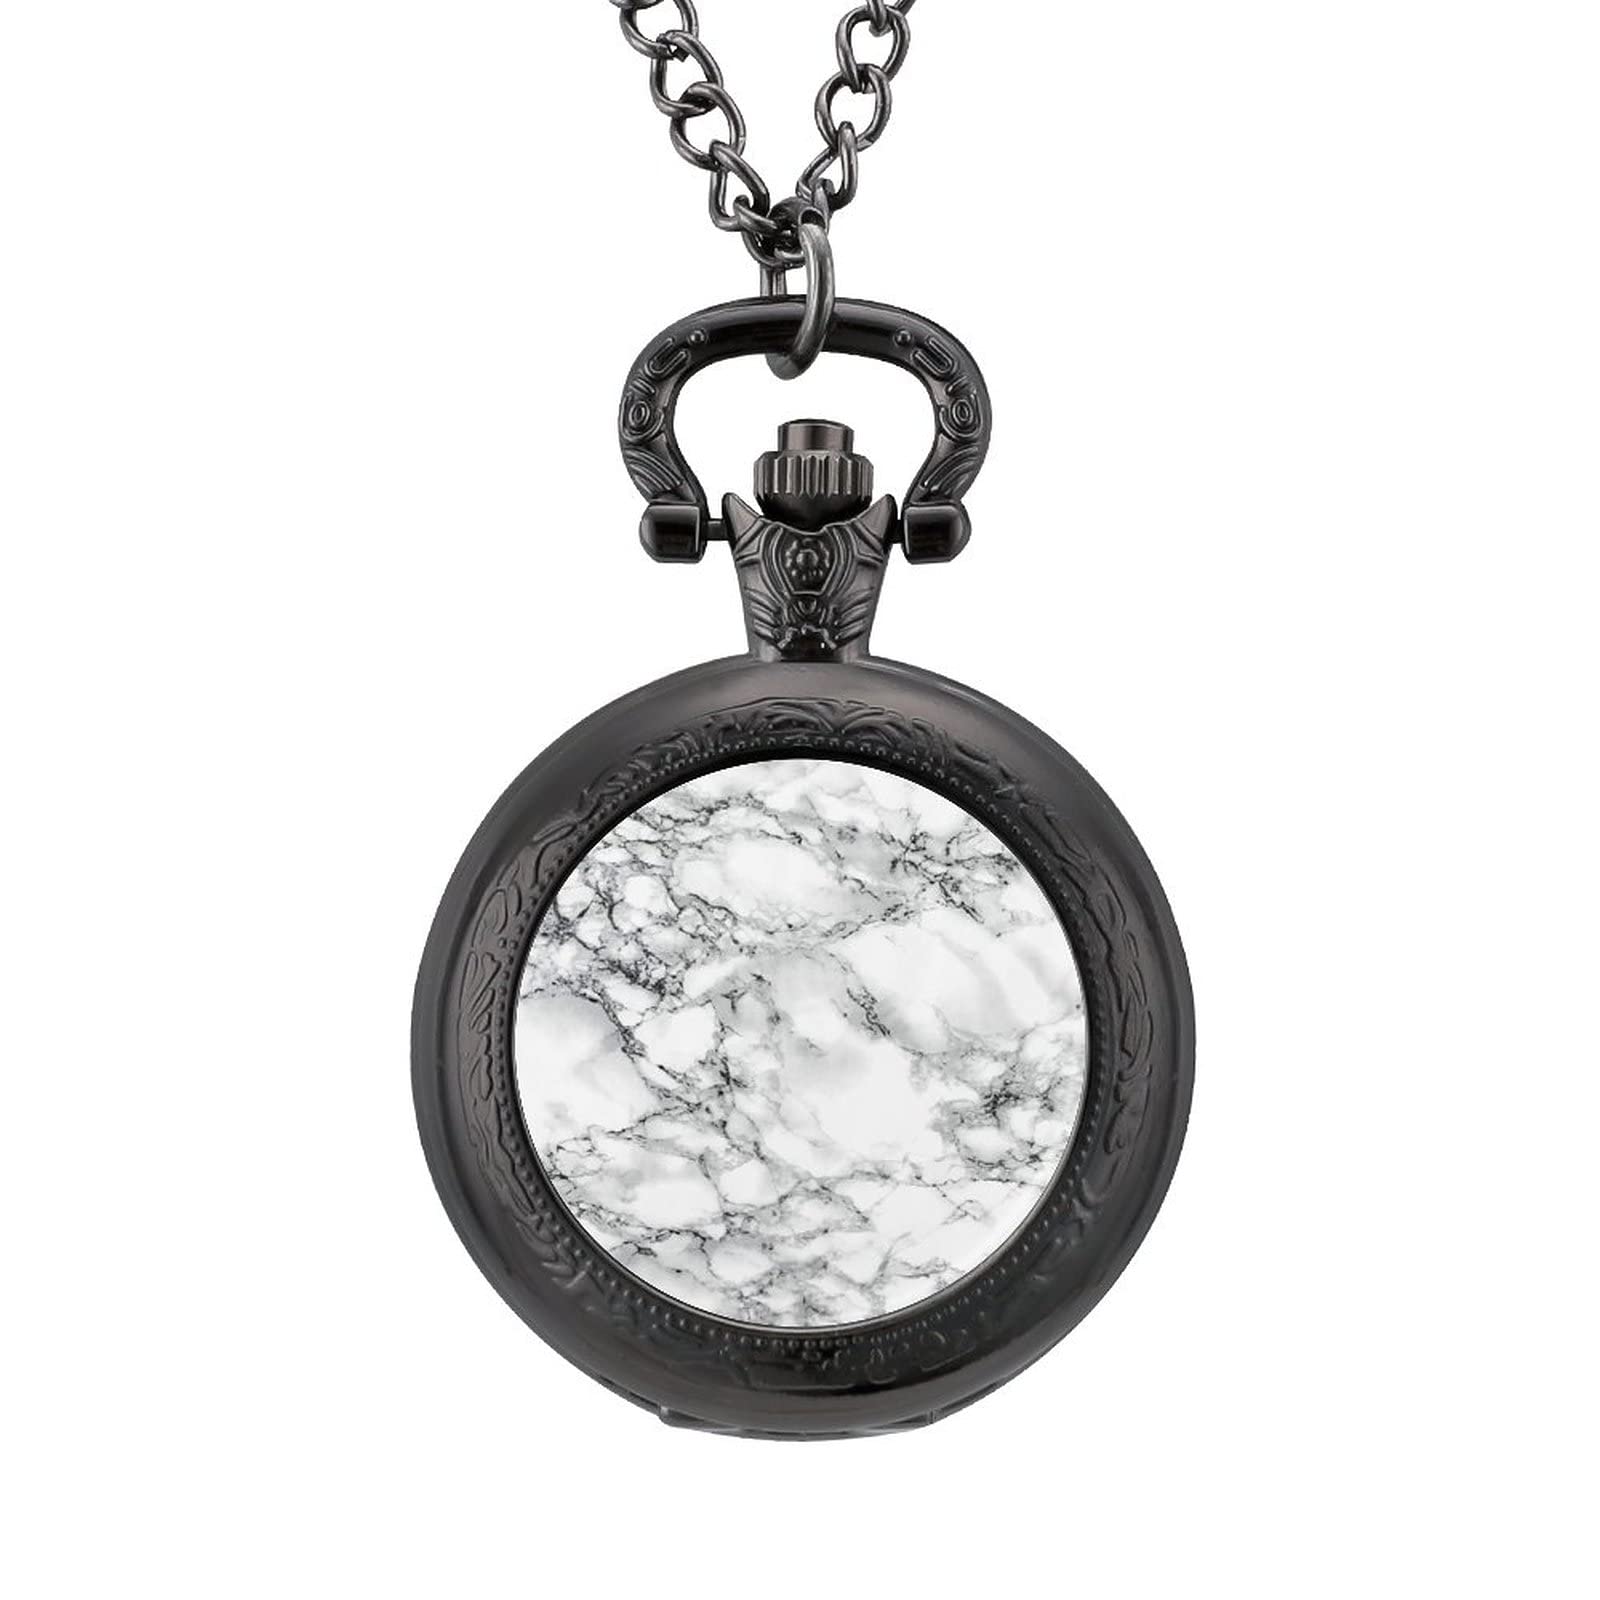 White Marble Texture Pattern Pocket Watches for Men with Chain Digital Vintage Mechanical Pocket Watch